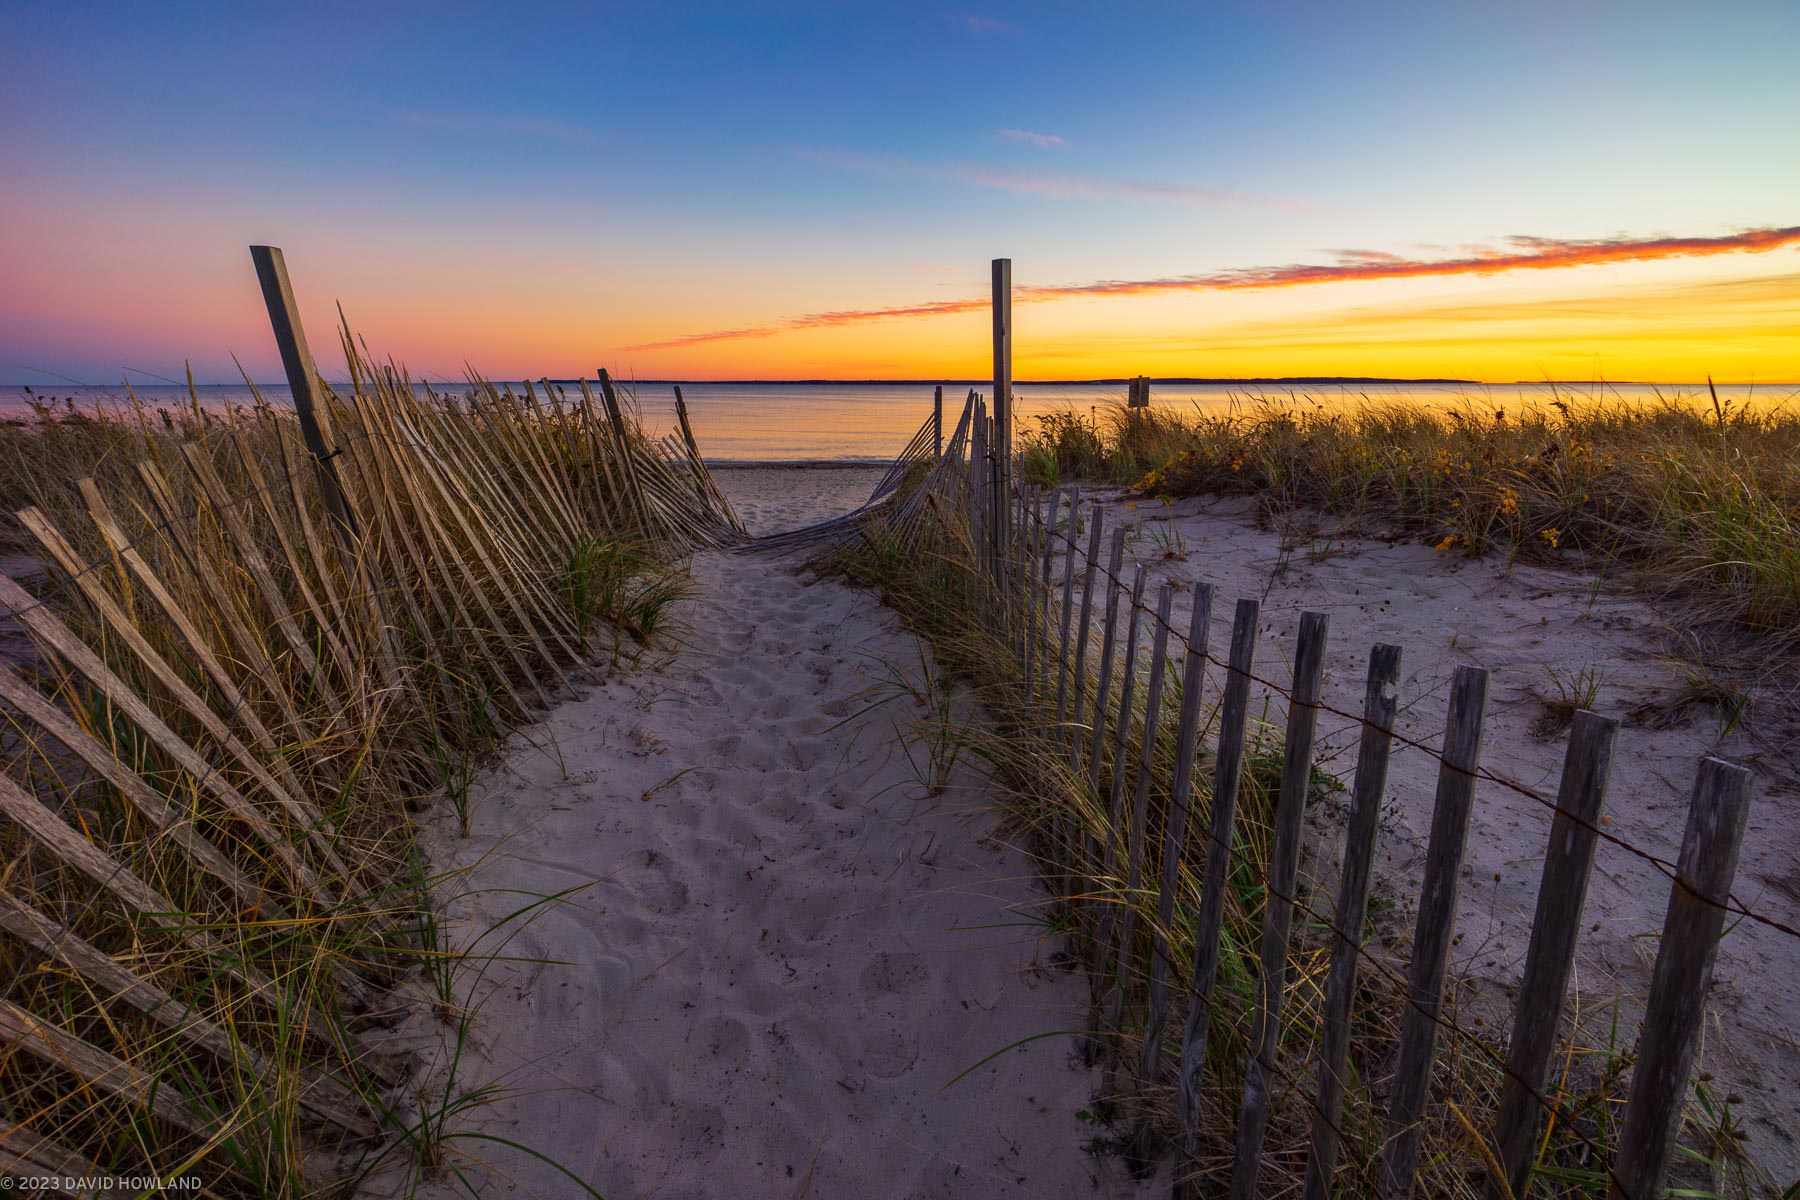 A photo of a battered wooden fence marking a path through the dunes of Surf Drive Beach at sunset in Falmouth, Massachusetts.